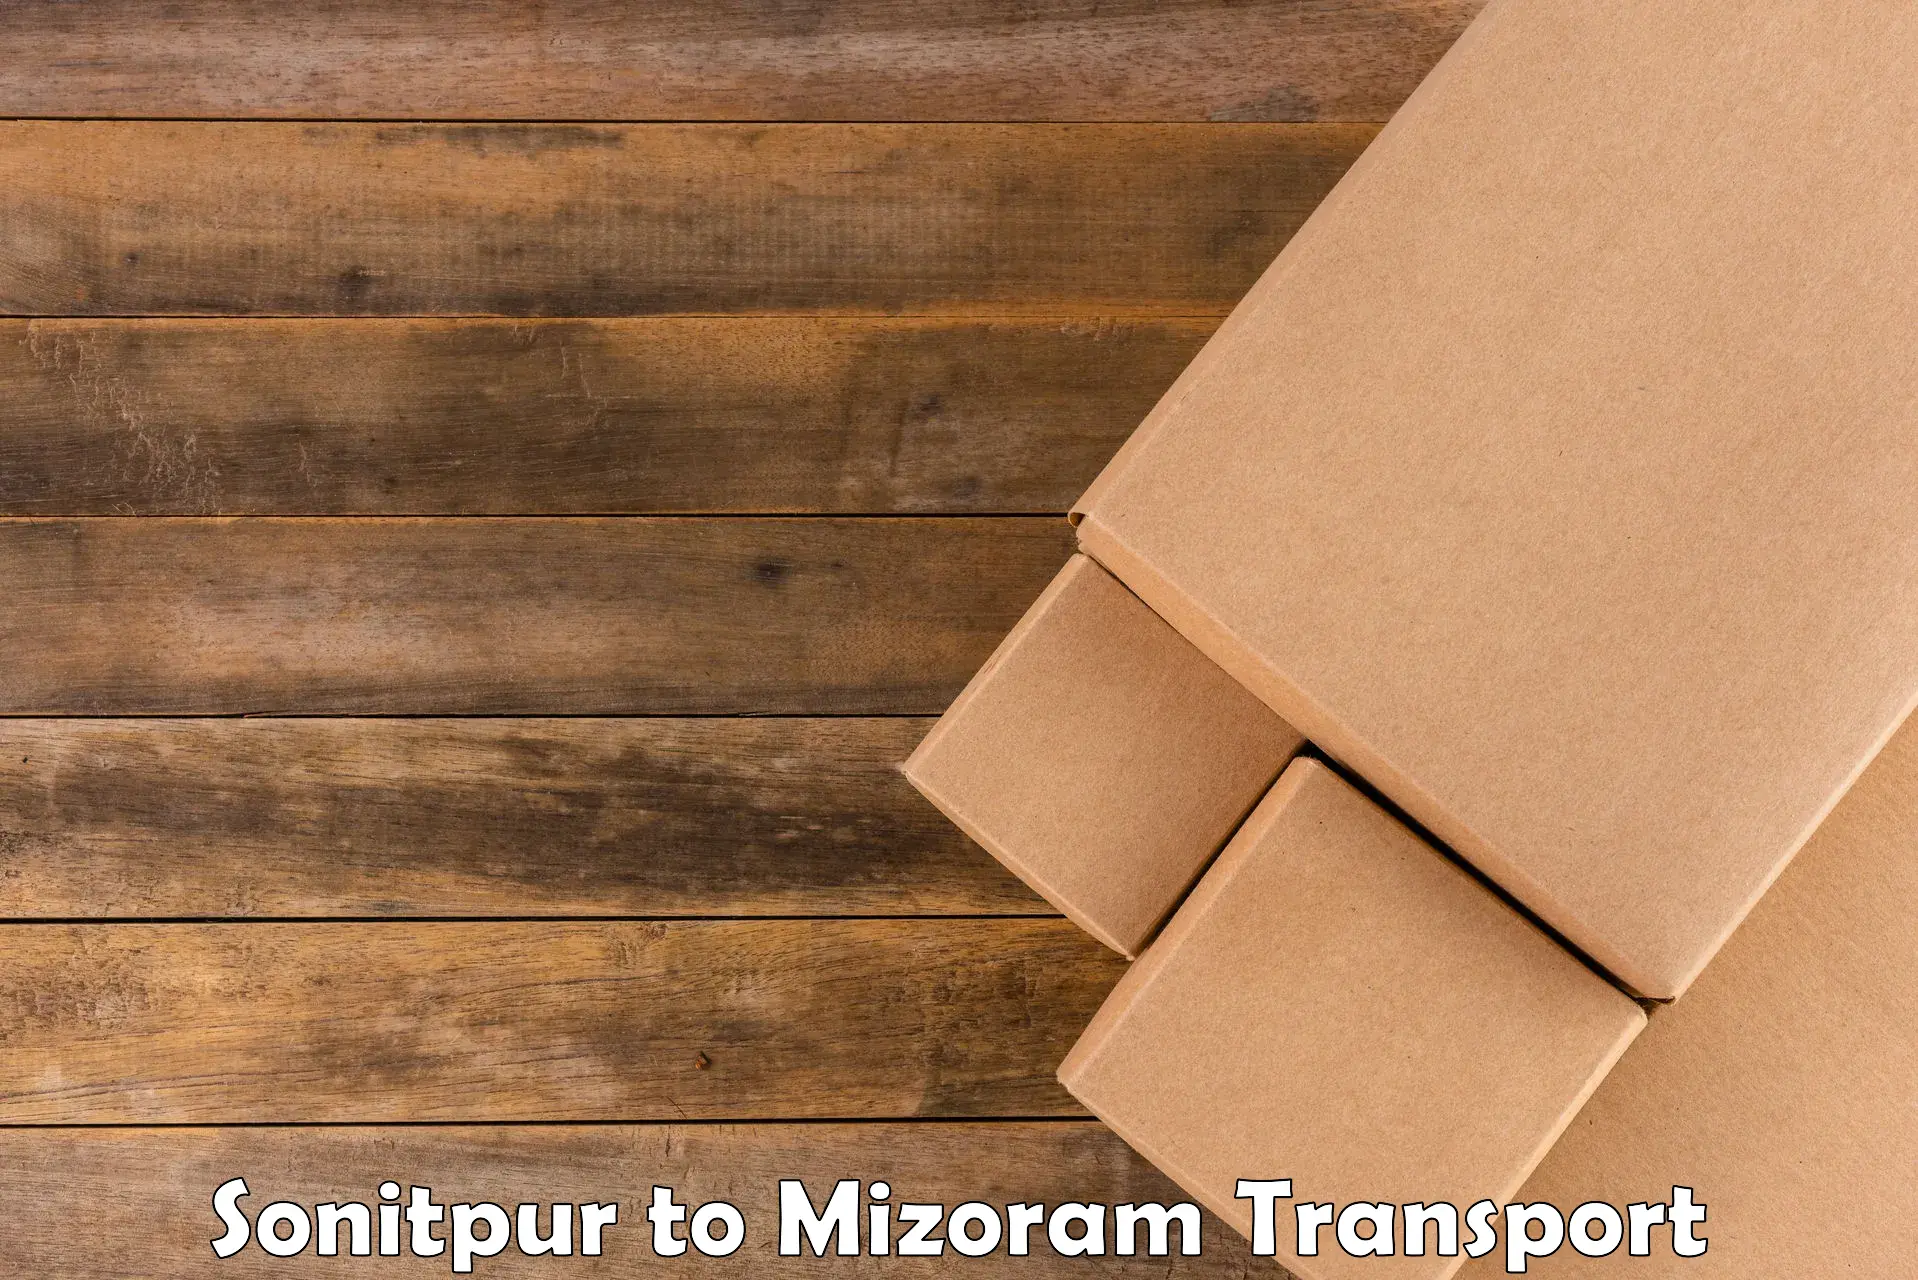 Air freight transport services Sonitpur to Darlawn